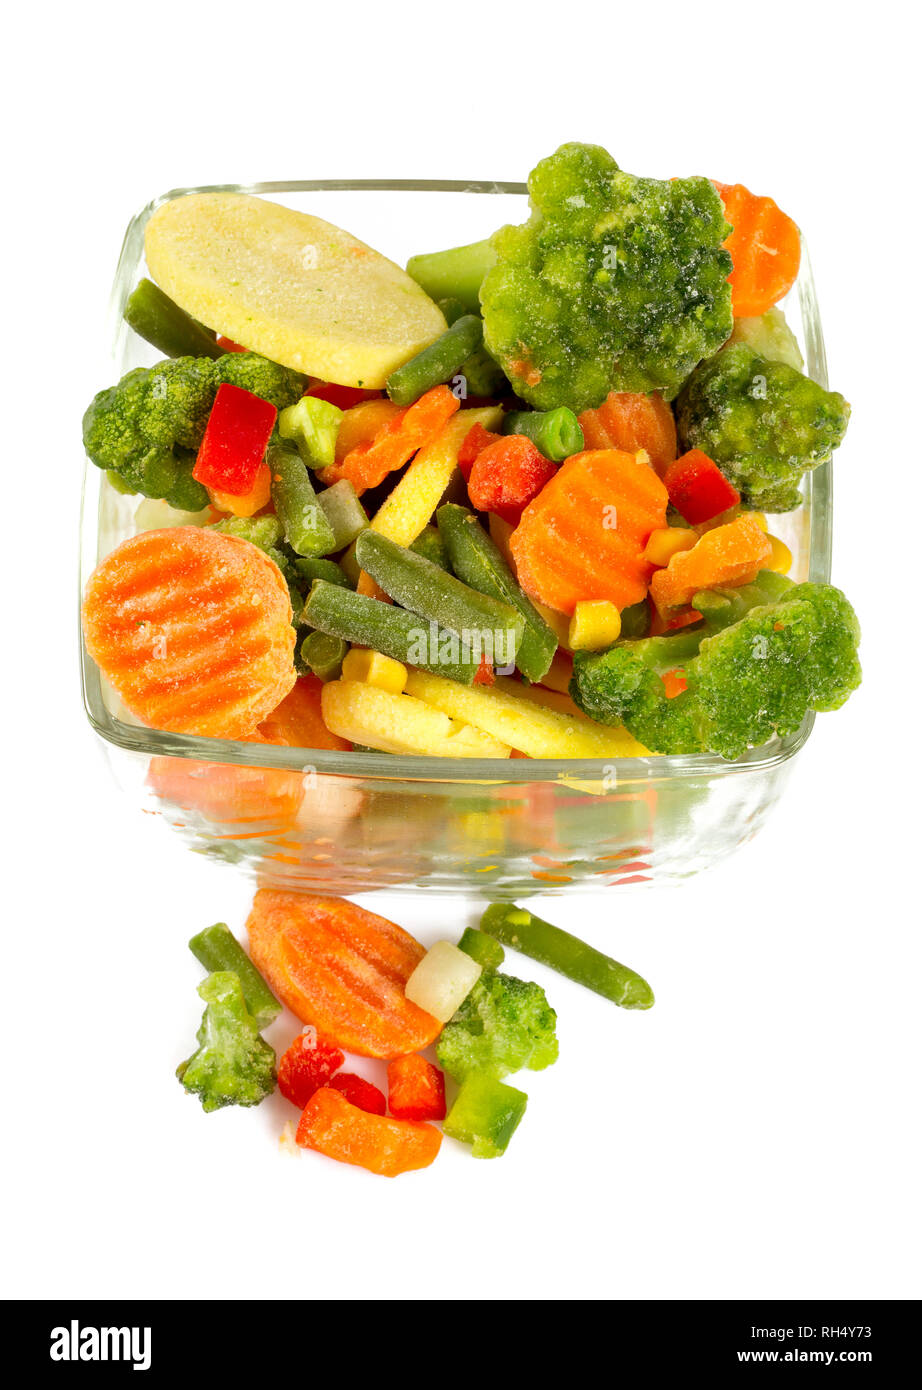 Broccoli and green been stir fry Cut Out Stock Images & Pictures - Alamy